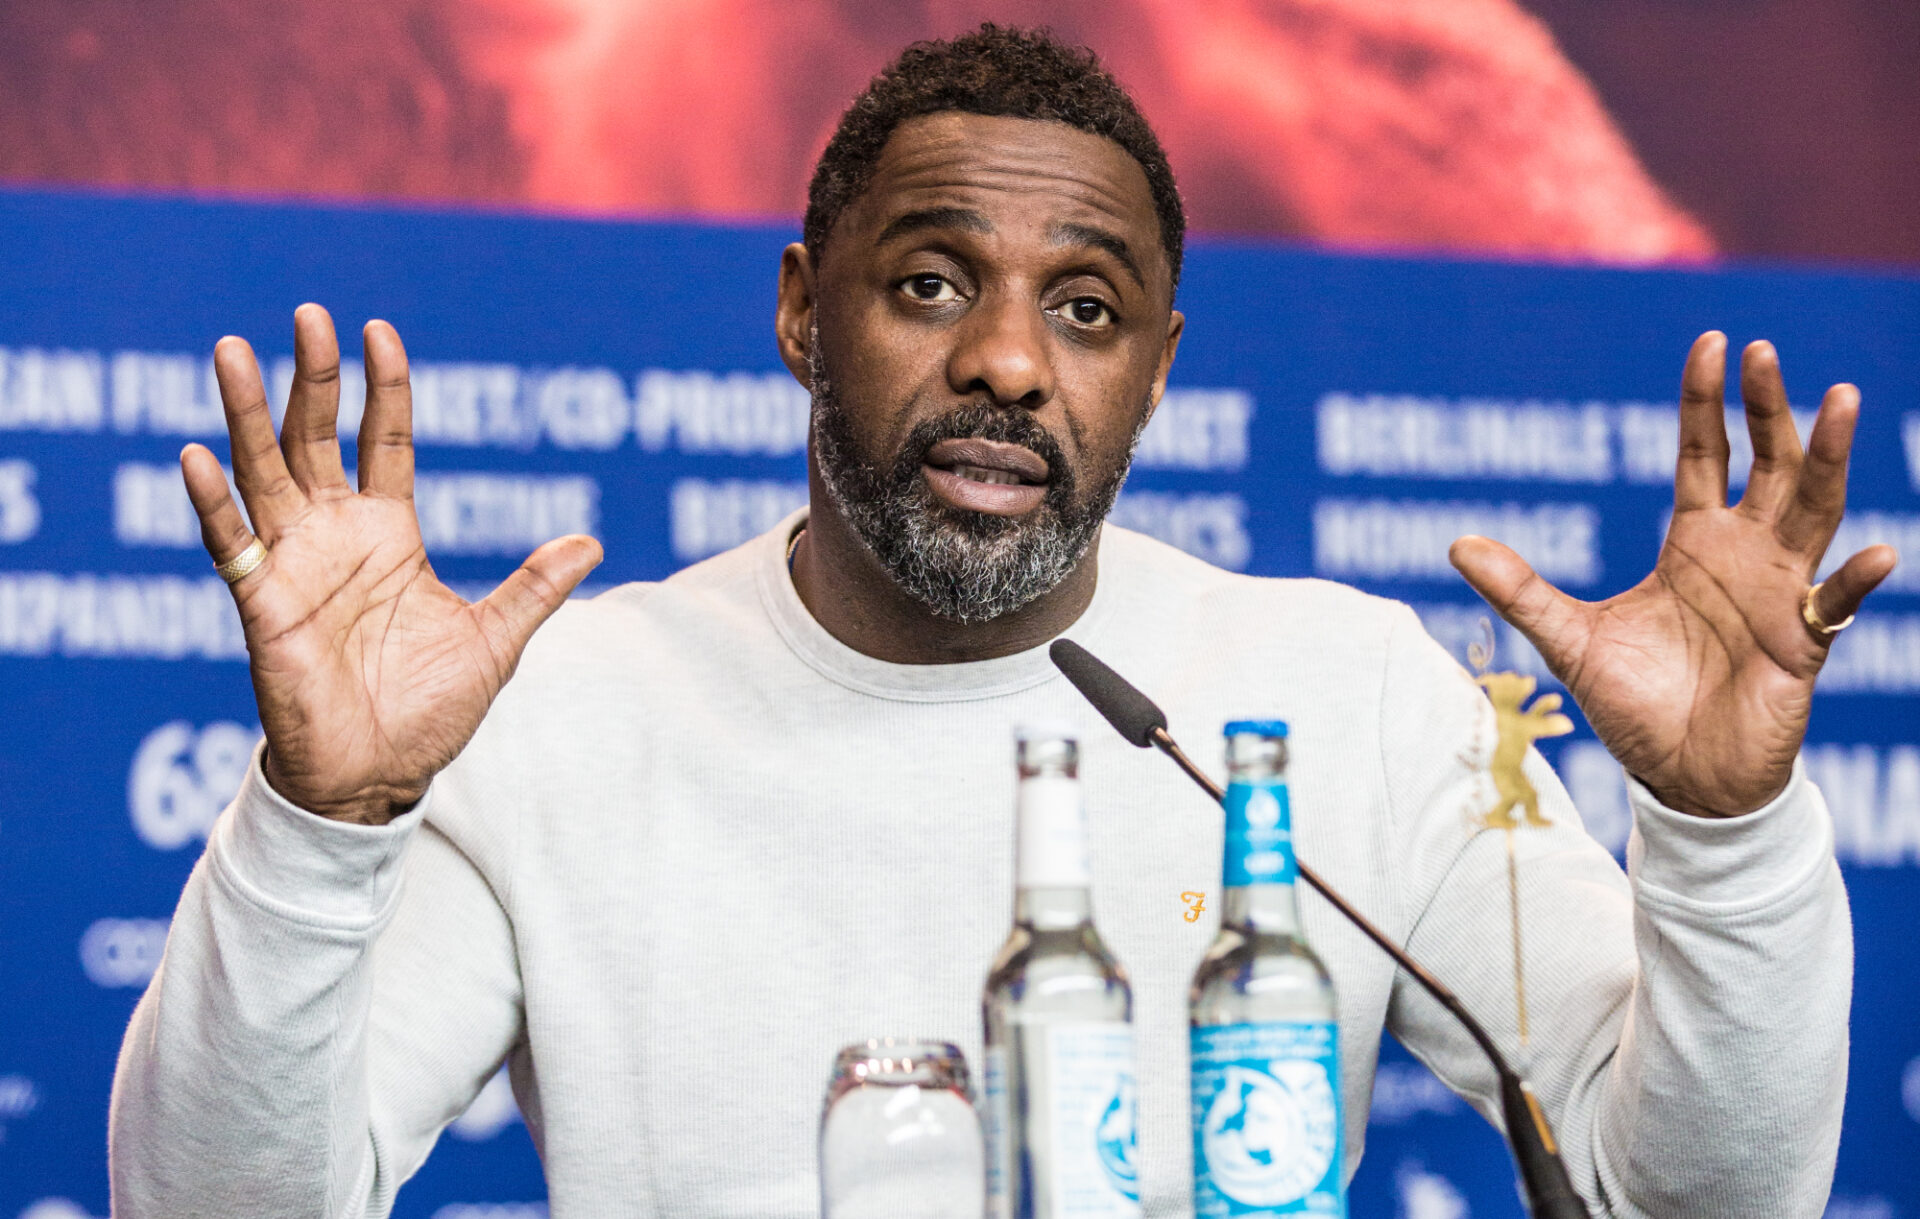 Idris Elba had gun held to his head in terrifying confrontation and says 'I  almost lost my life